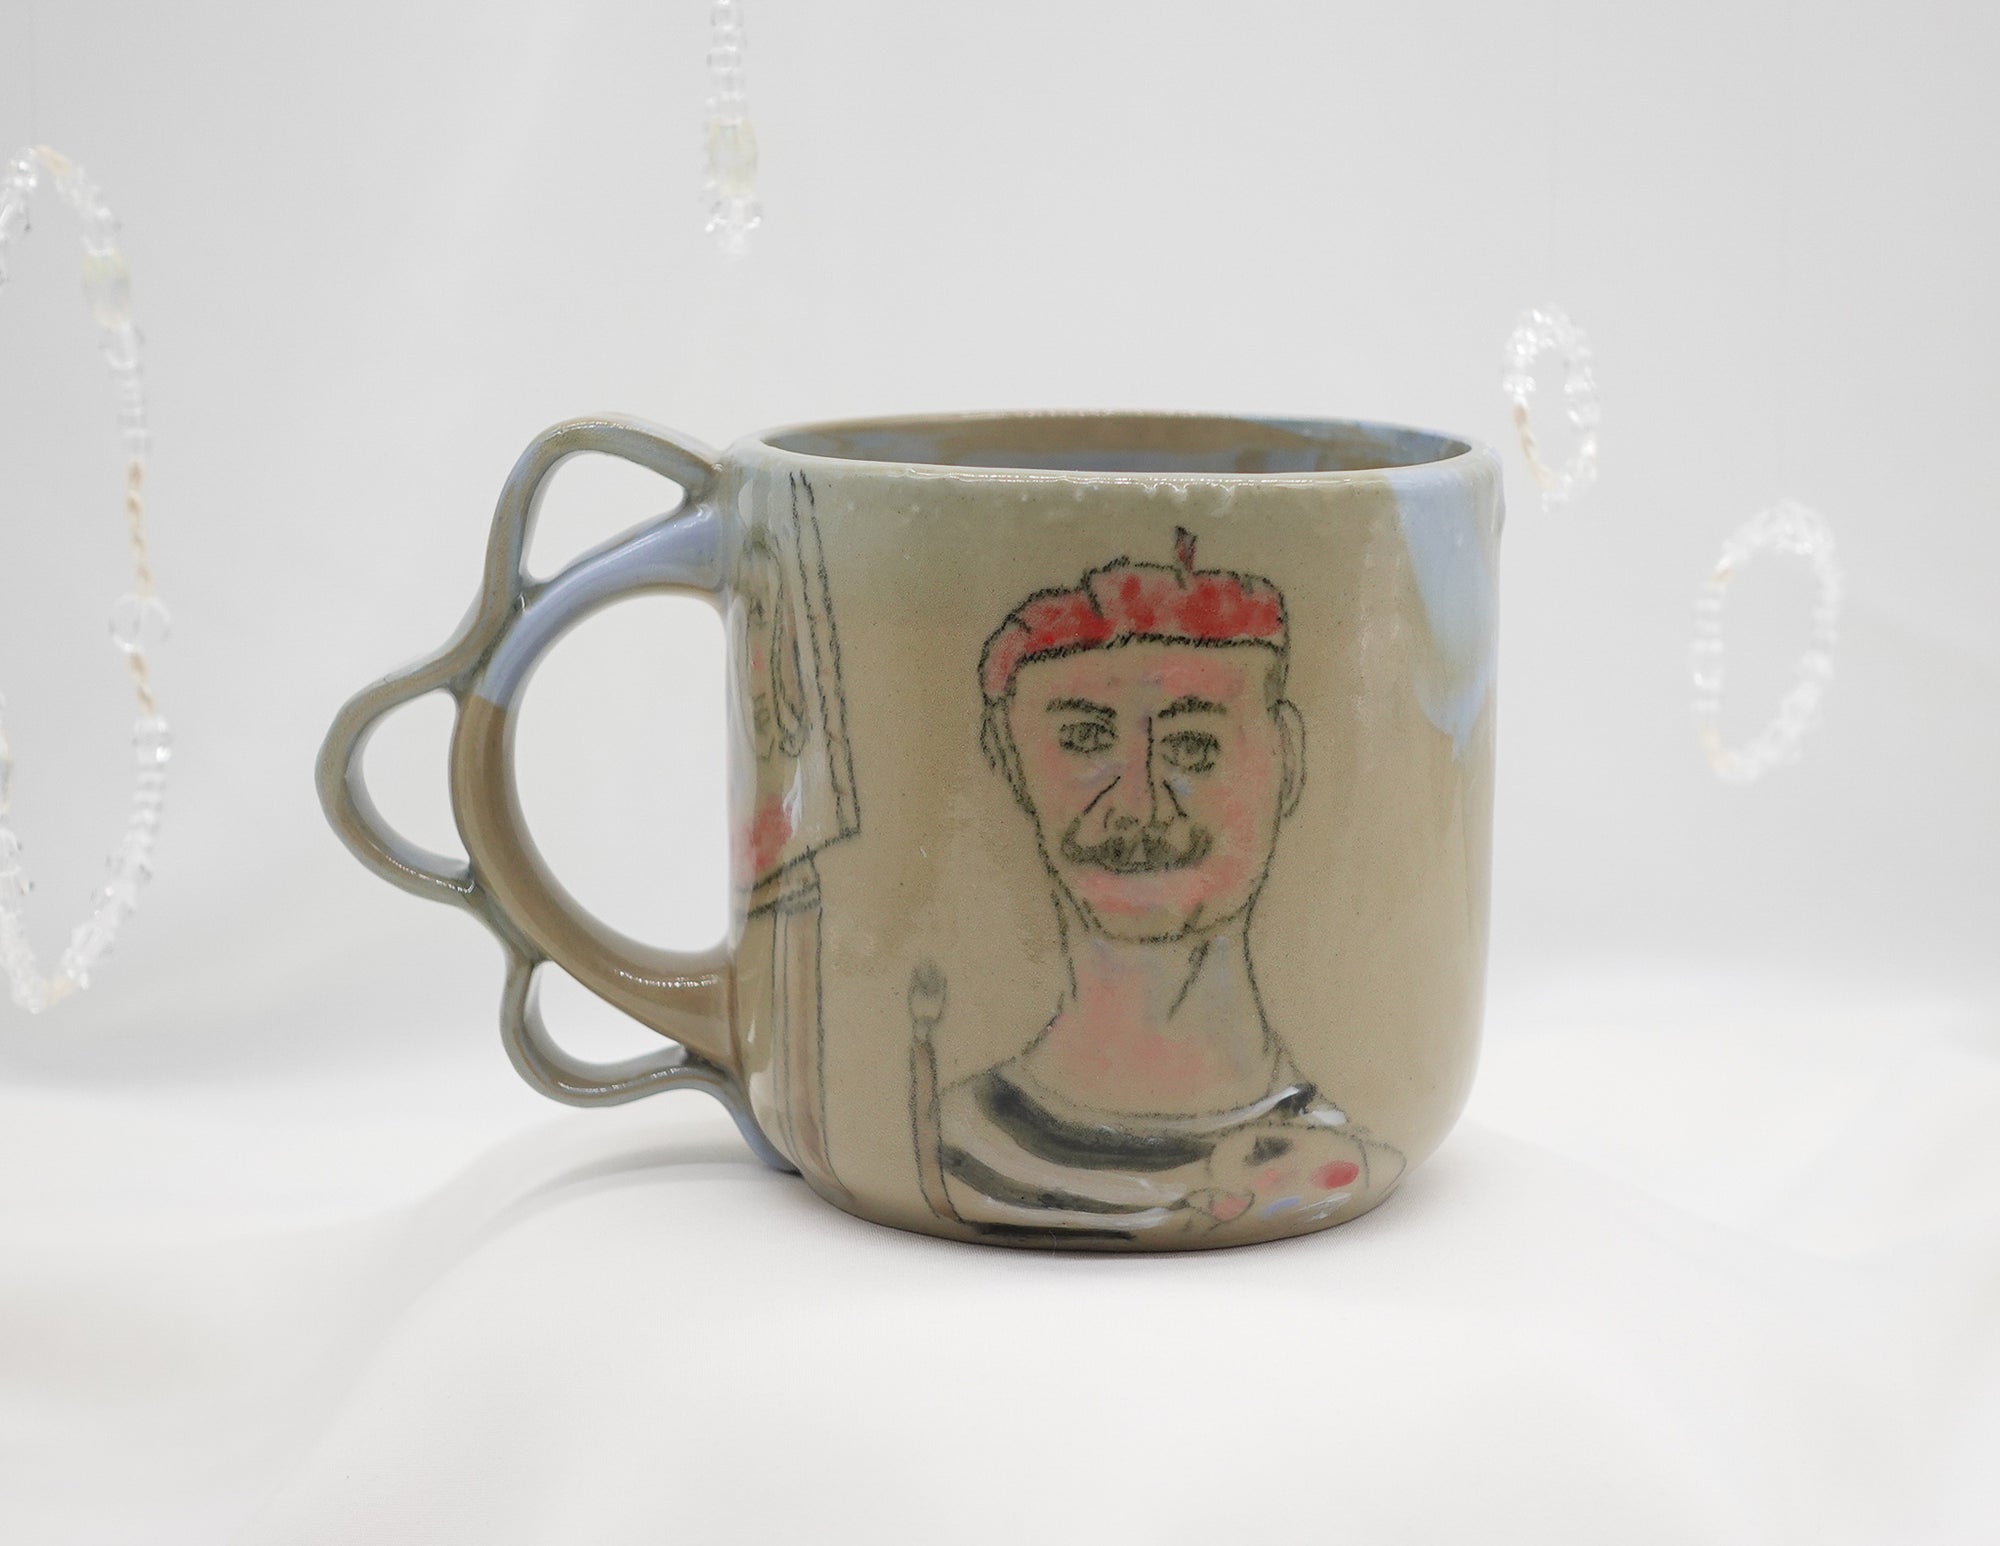 The French Painter Mug with Wavy Handle